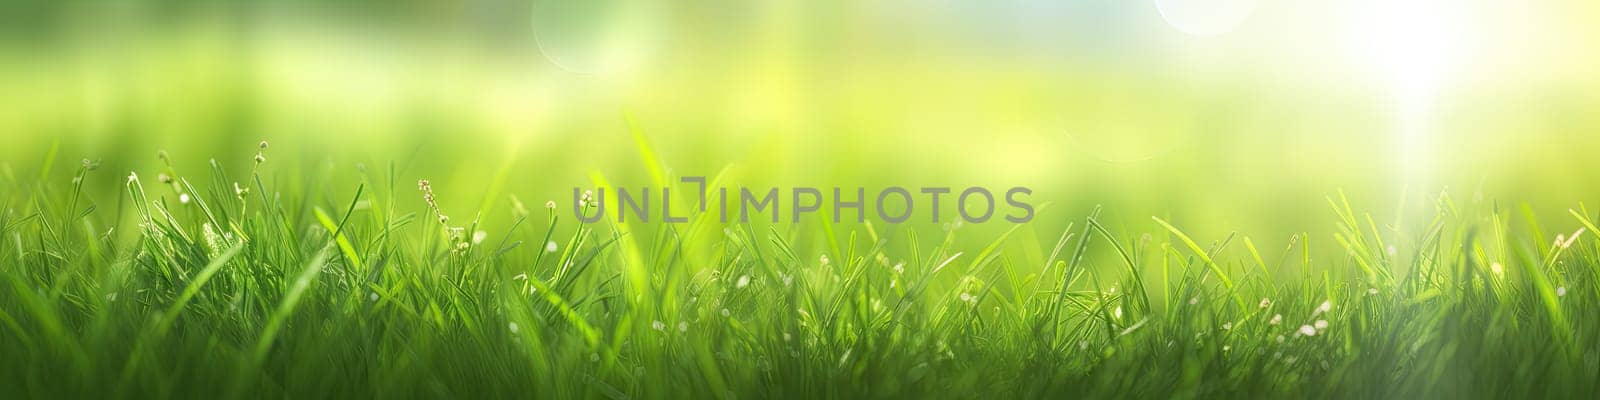 Green grass and sunlight banner background by Kadula